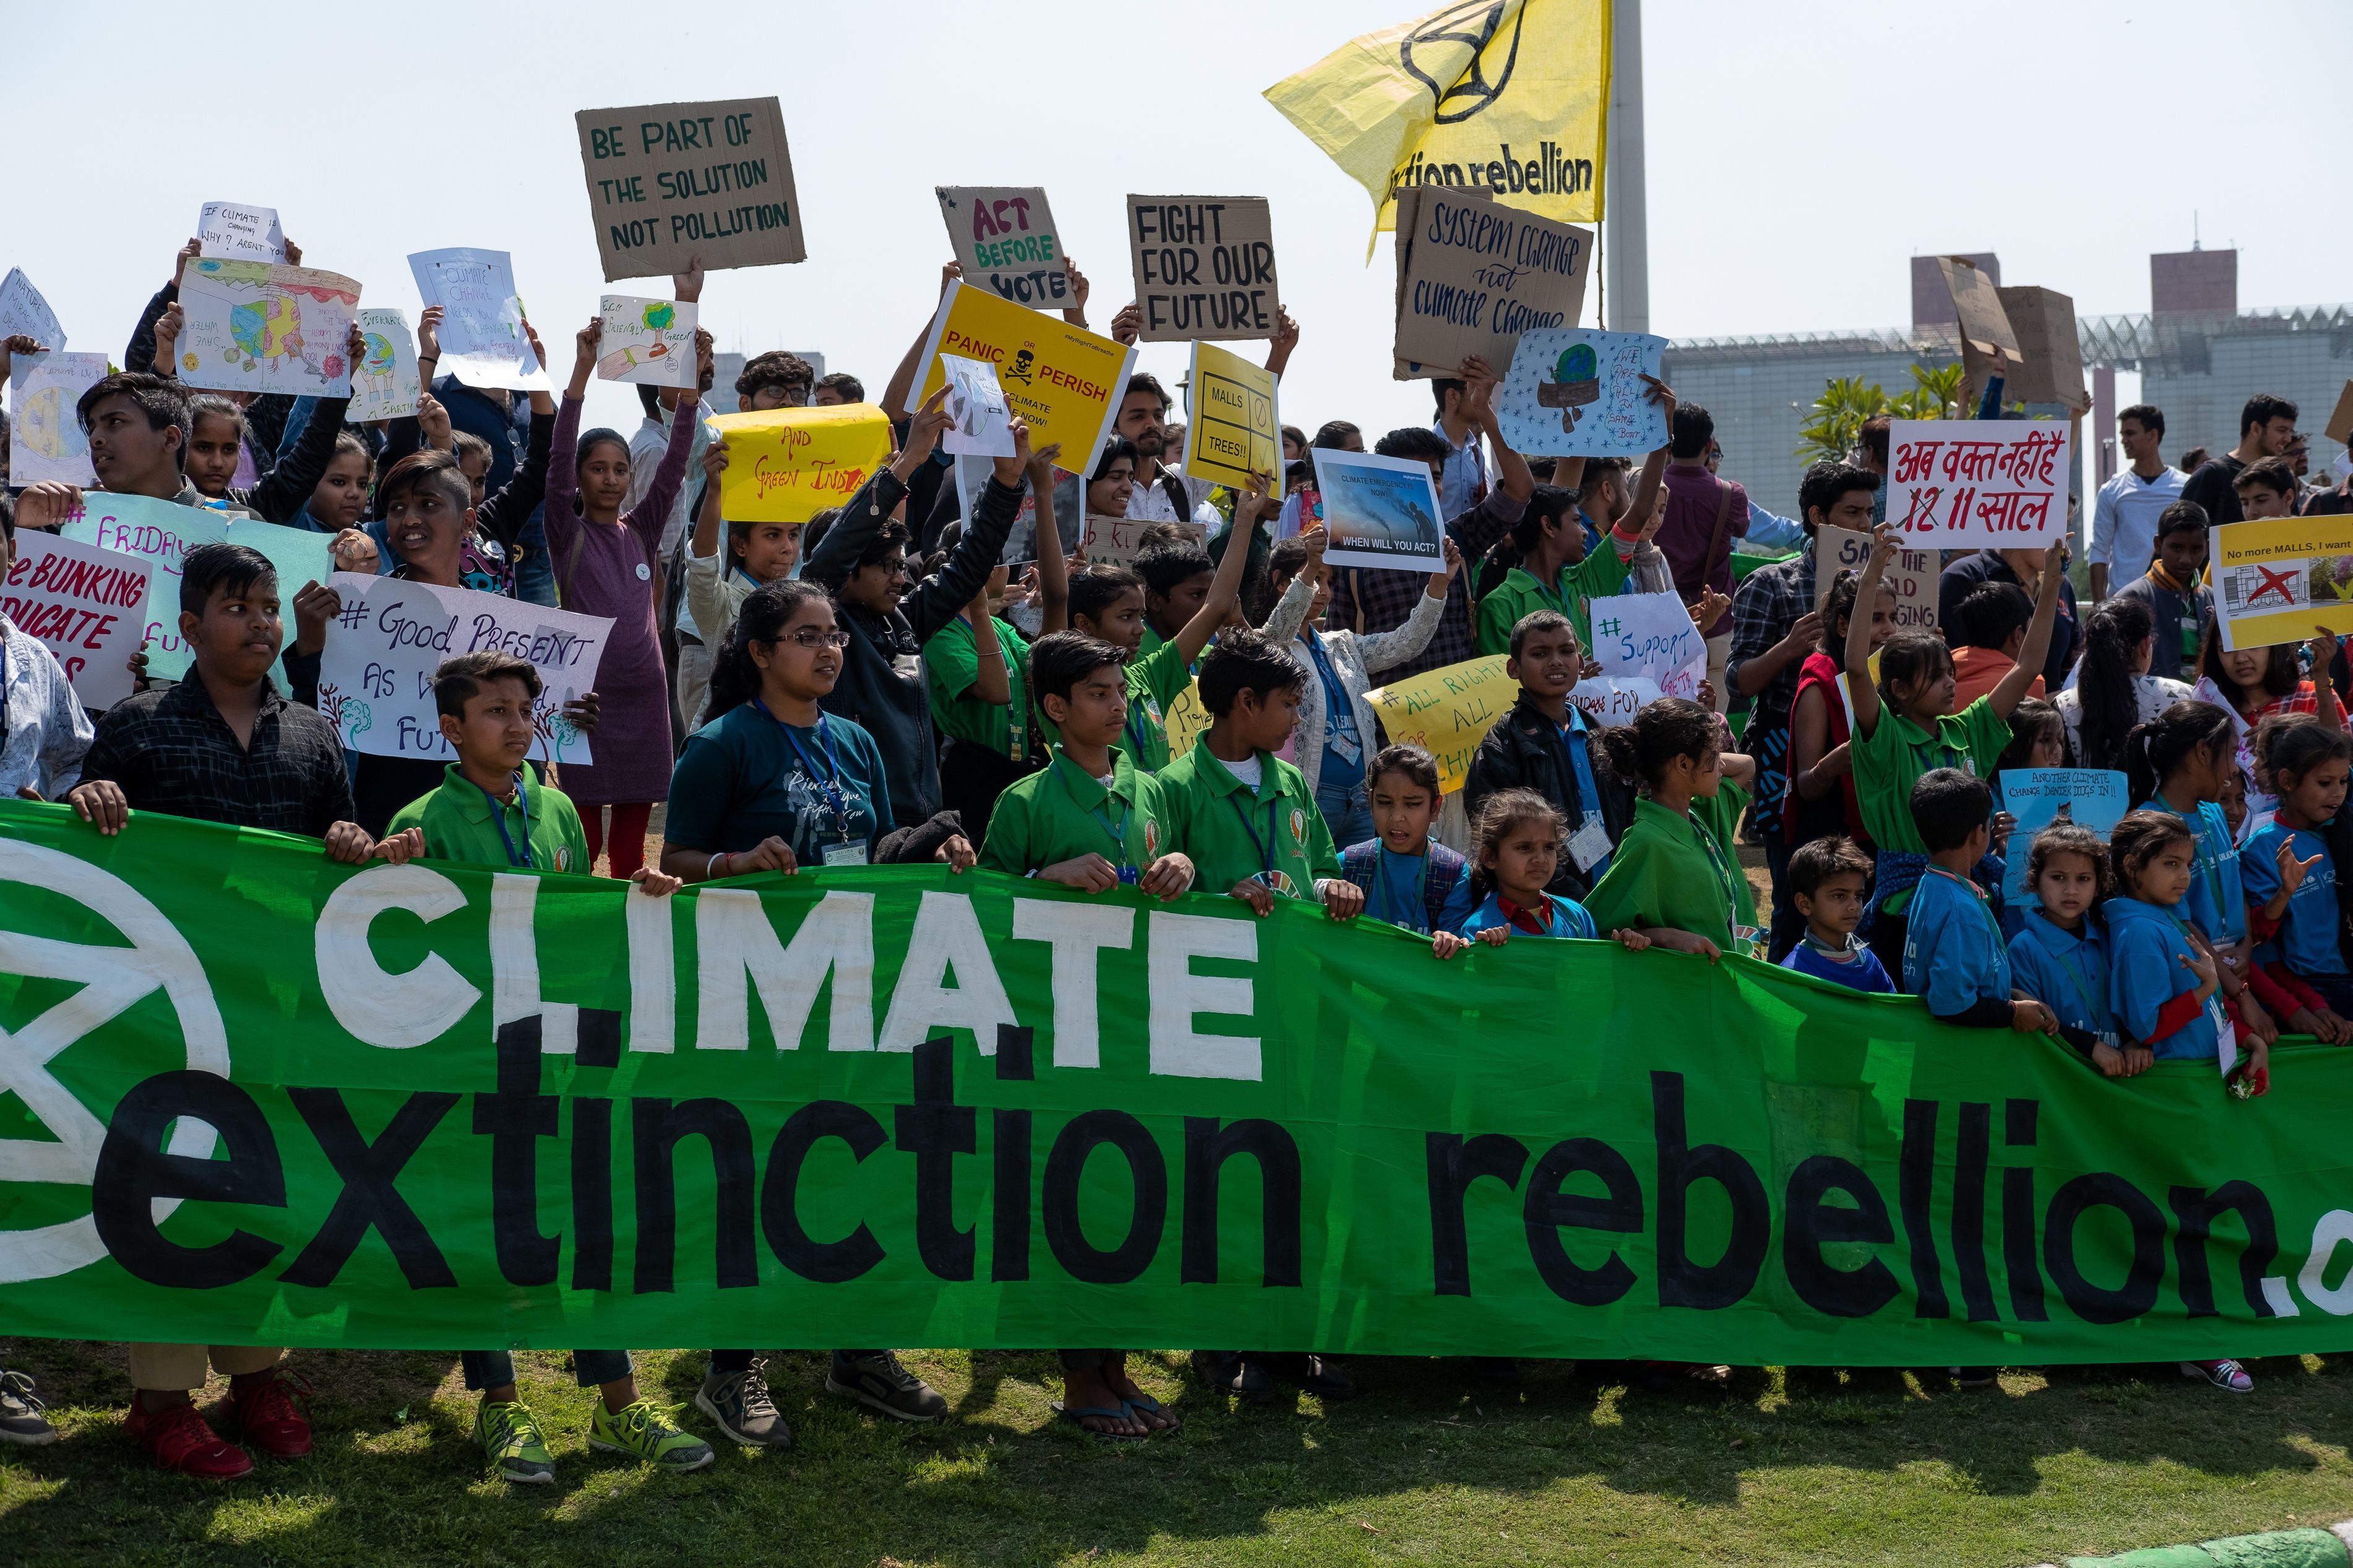 Students and children hold a large green banner that reads "climate extinction rebellion"